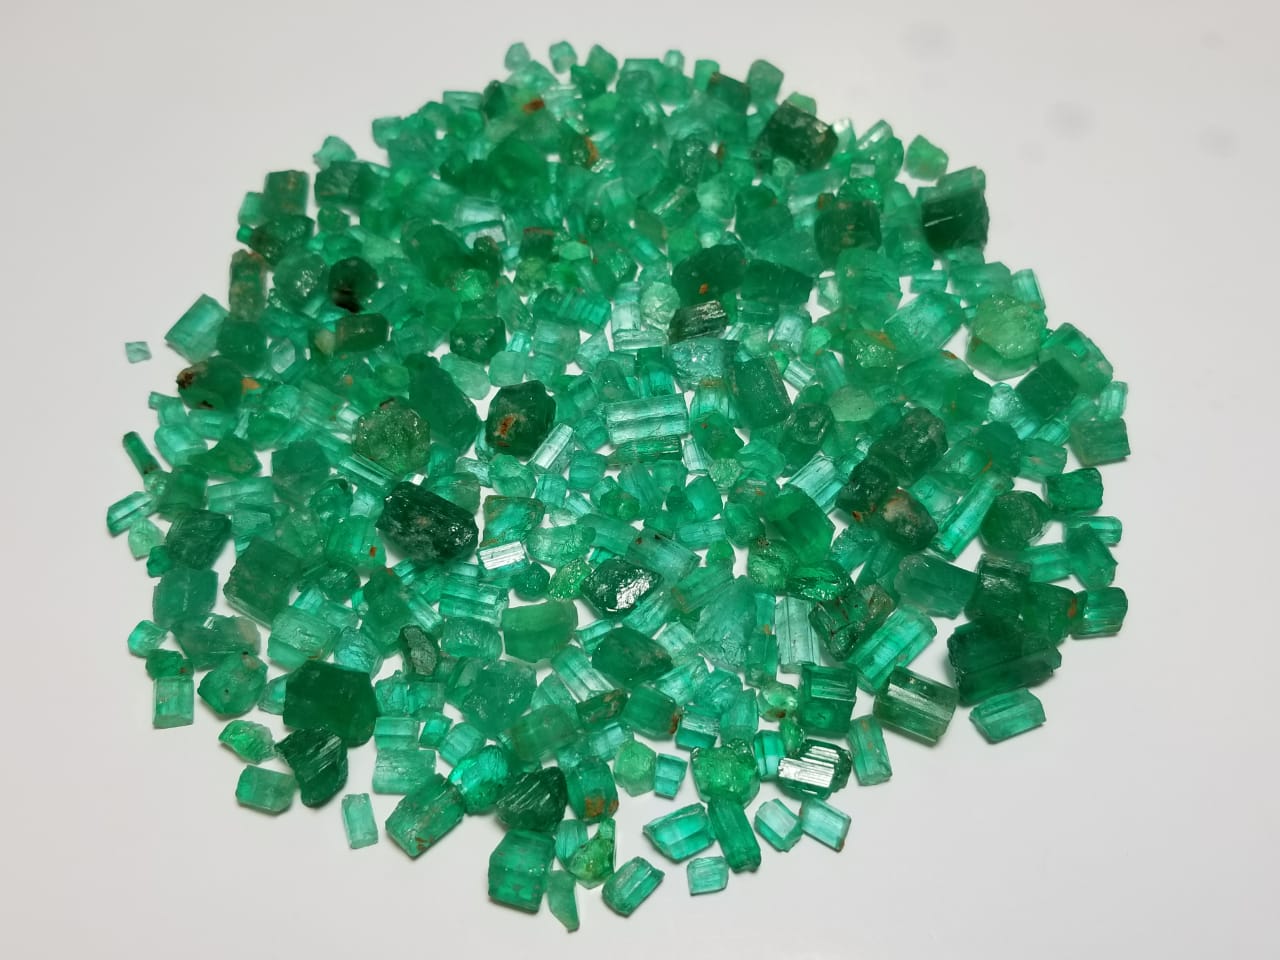 Buy Facet Grade Rough Emeralds Lot available for sale